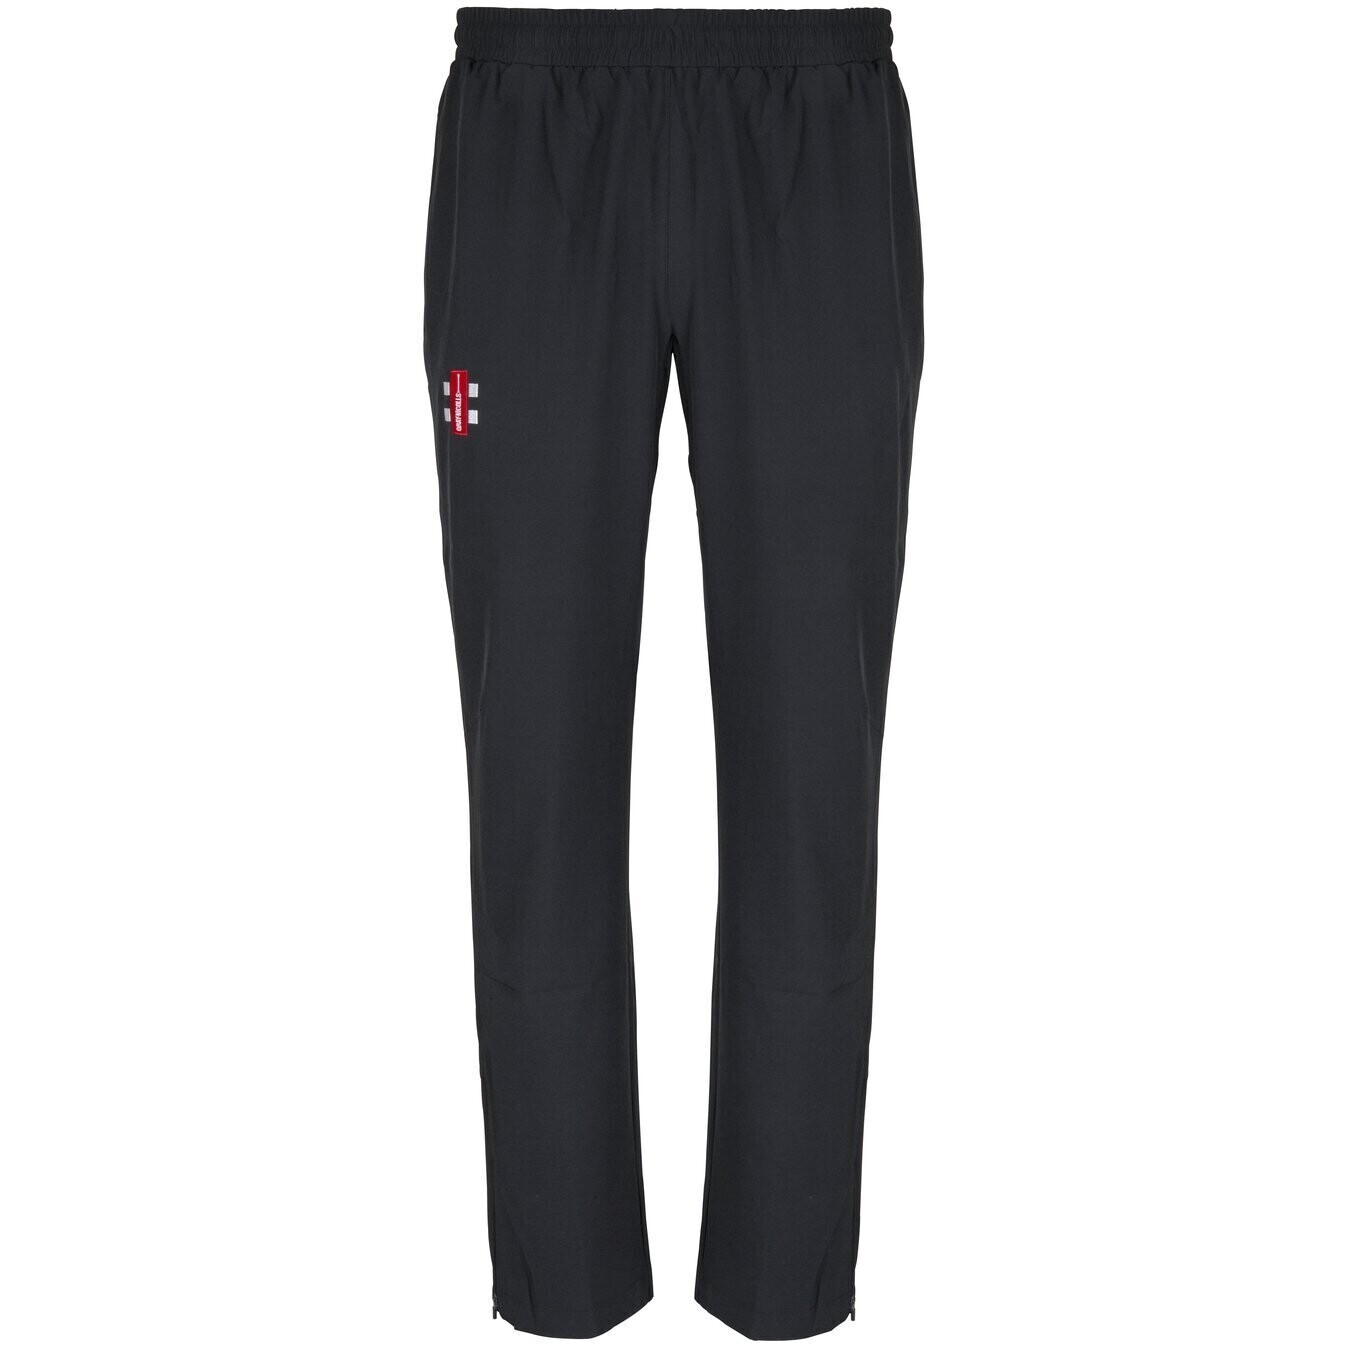 Thornaby Velocity Training Trousers